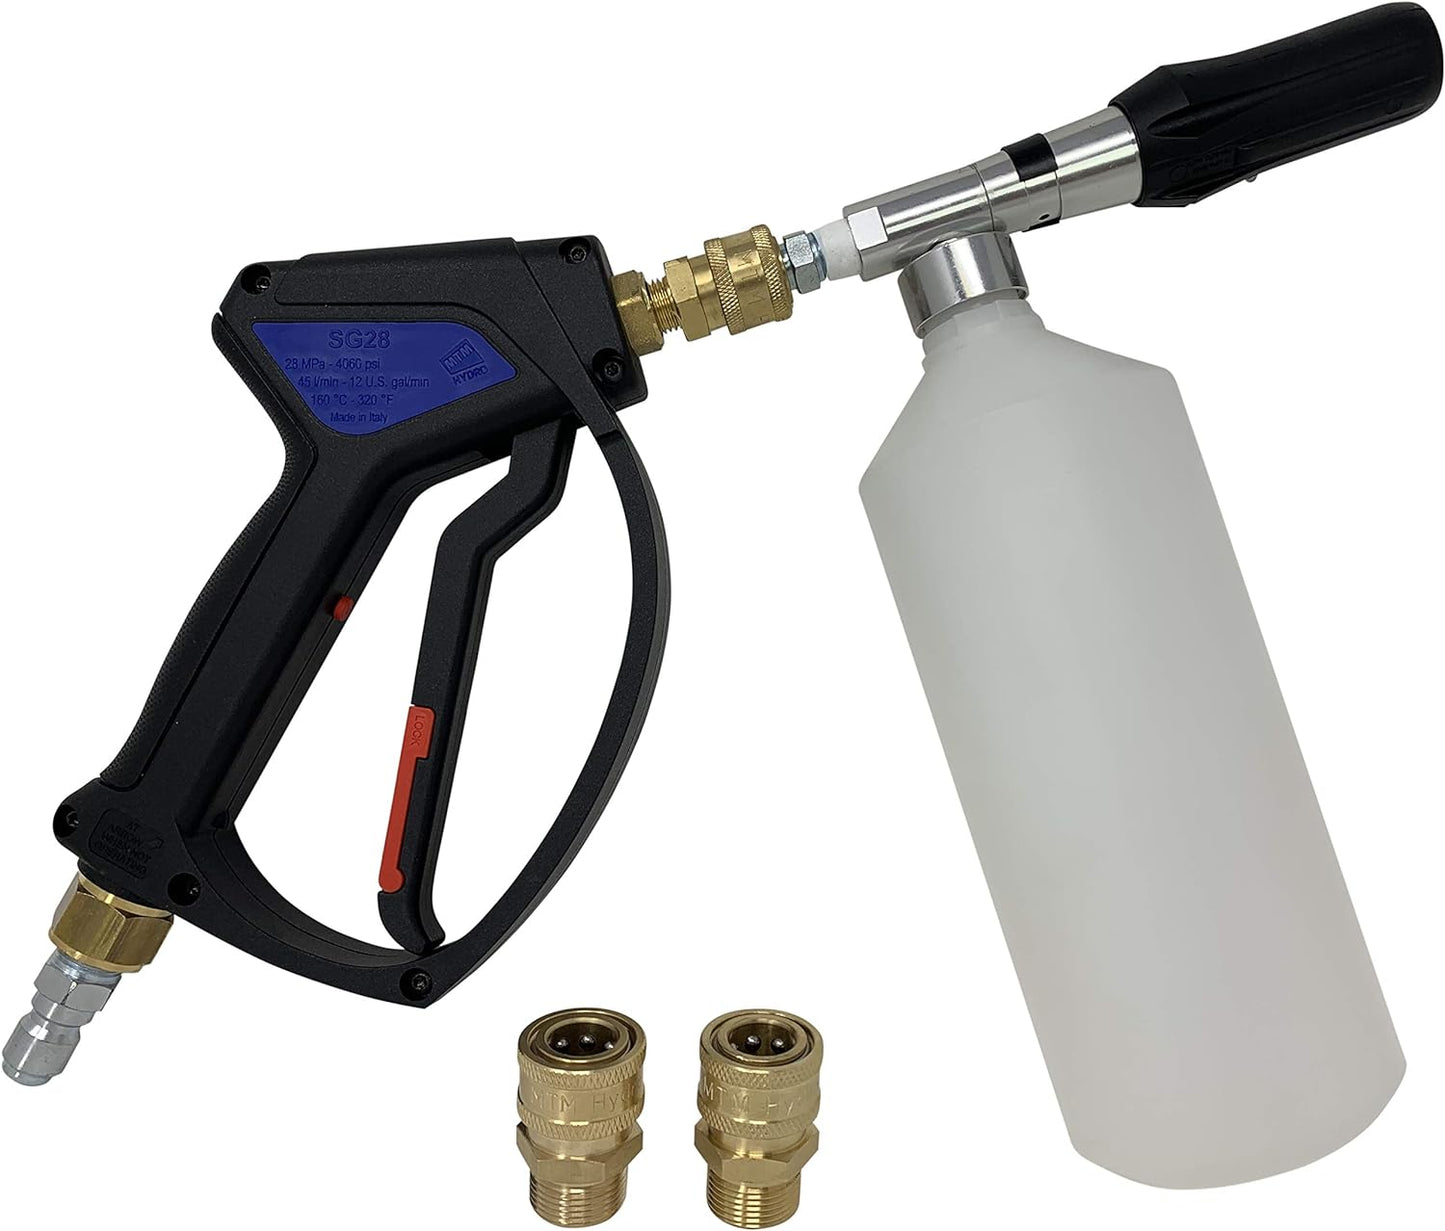 Foam Cannon with Spray Gun Power Washer Attachments and Fittings to Work with Most Electric Power Washer Brands, Foam Gun Pressure Washer Accessories to Make Your Car Cleaning Kit Complete